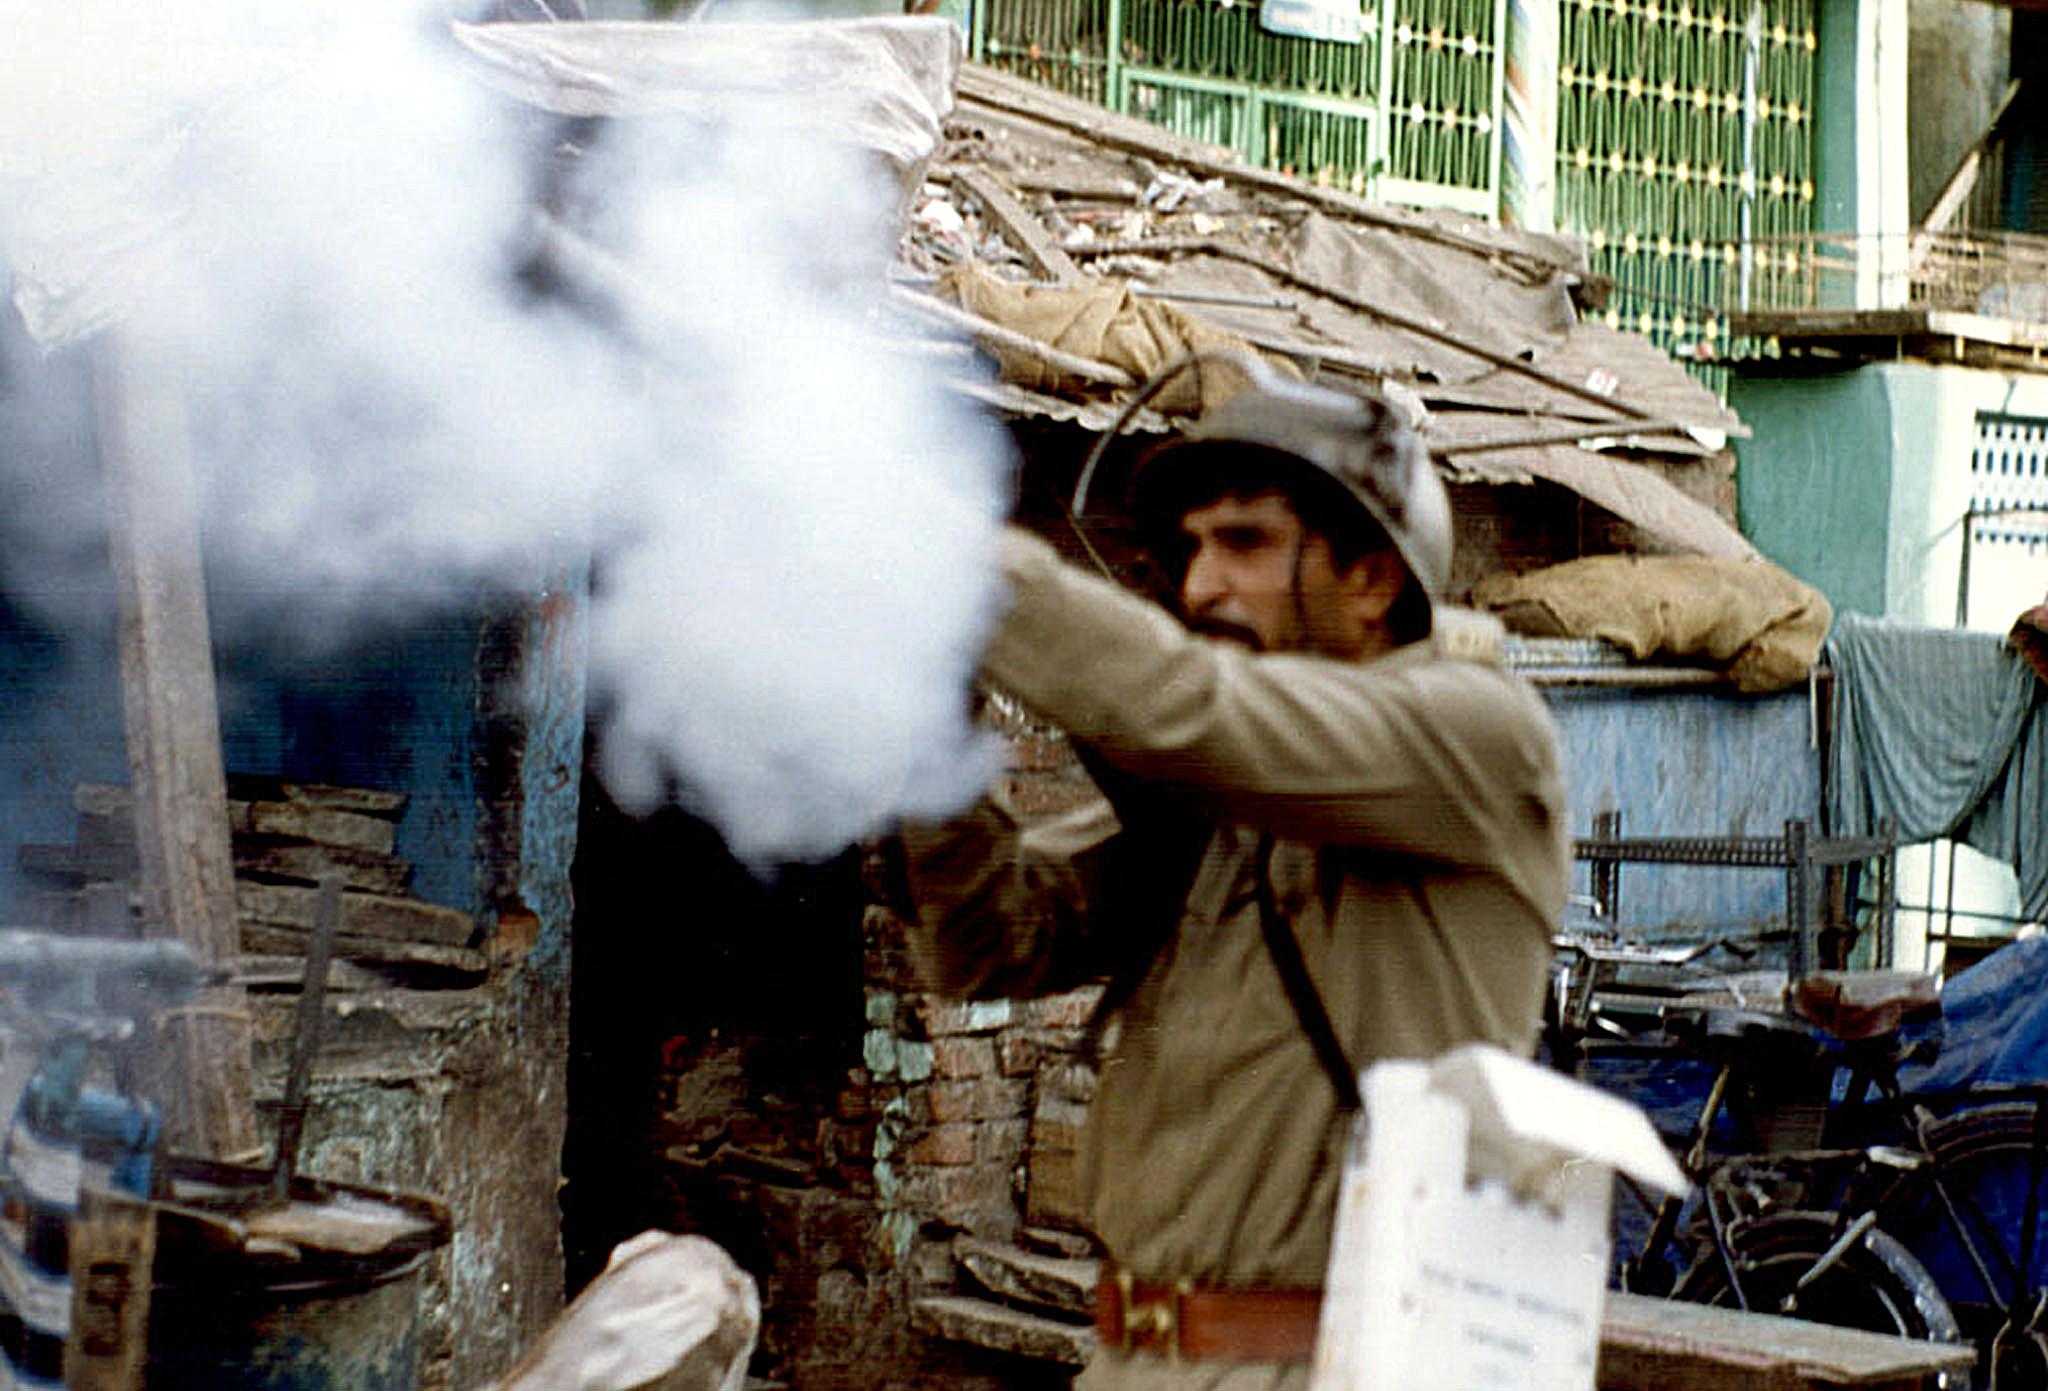 An Indian policeman shoot tear gas onto rioters in Ahmedabad on 5 April 2002